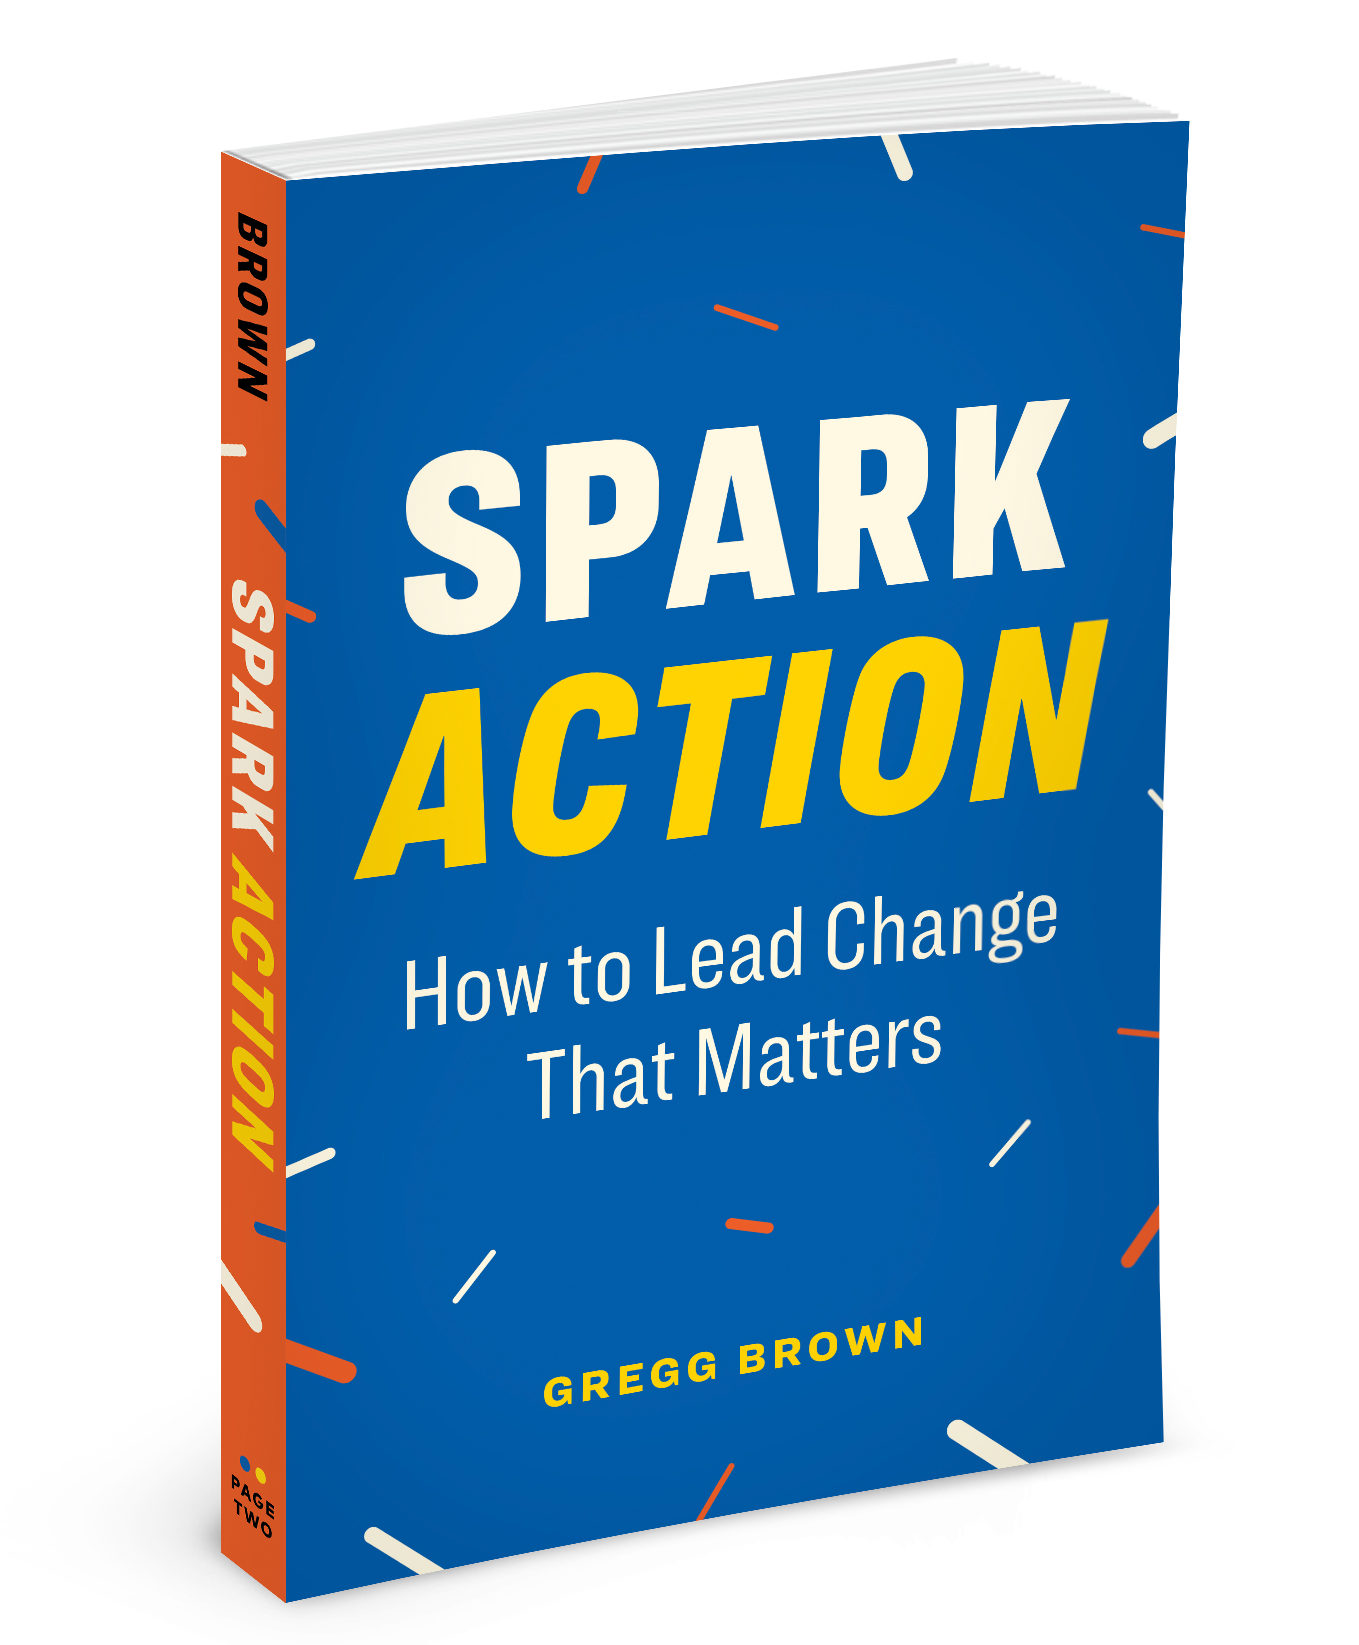 Spark Action - How to Lead Change That Matters